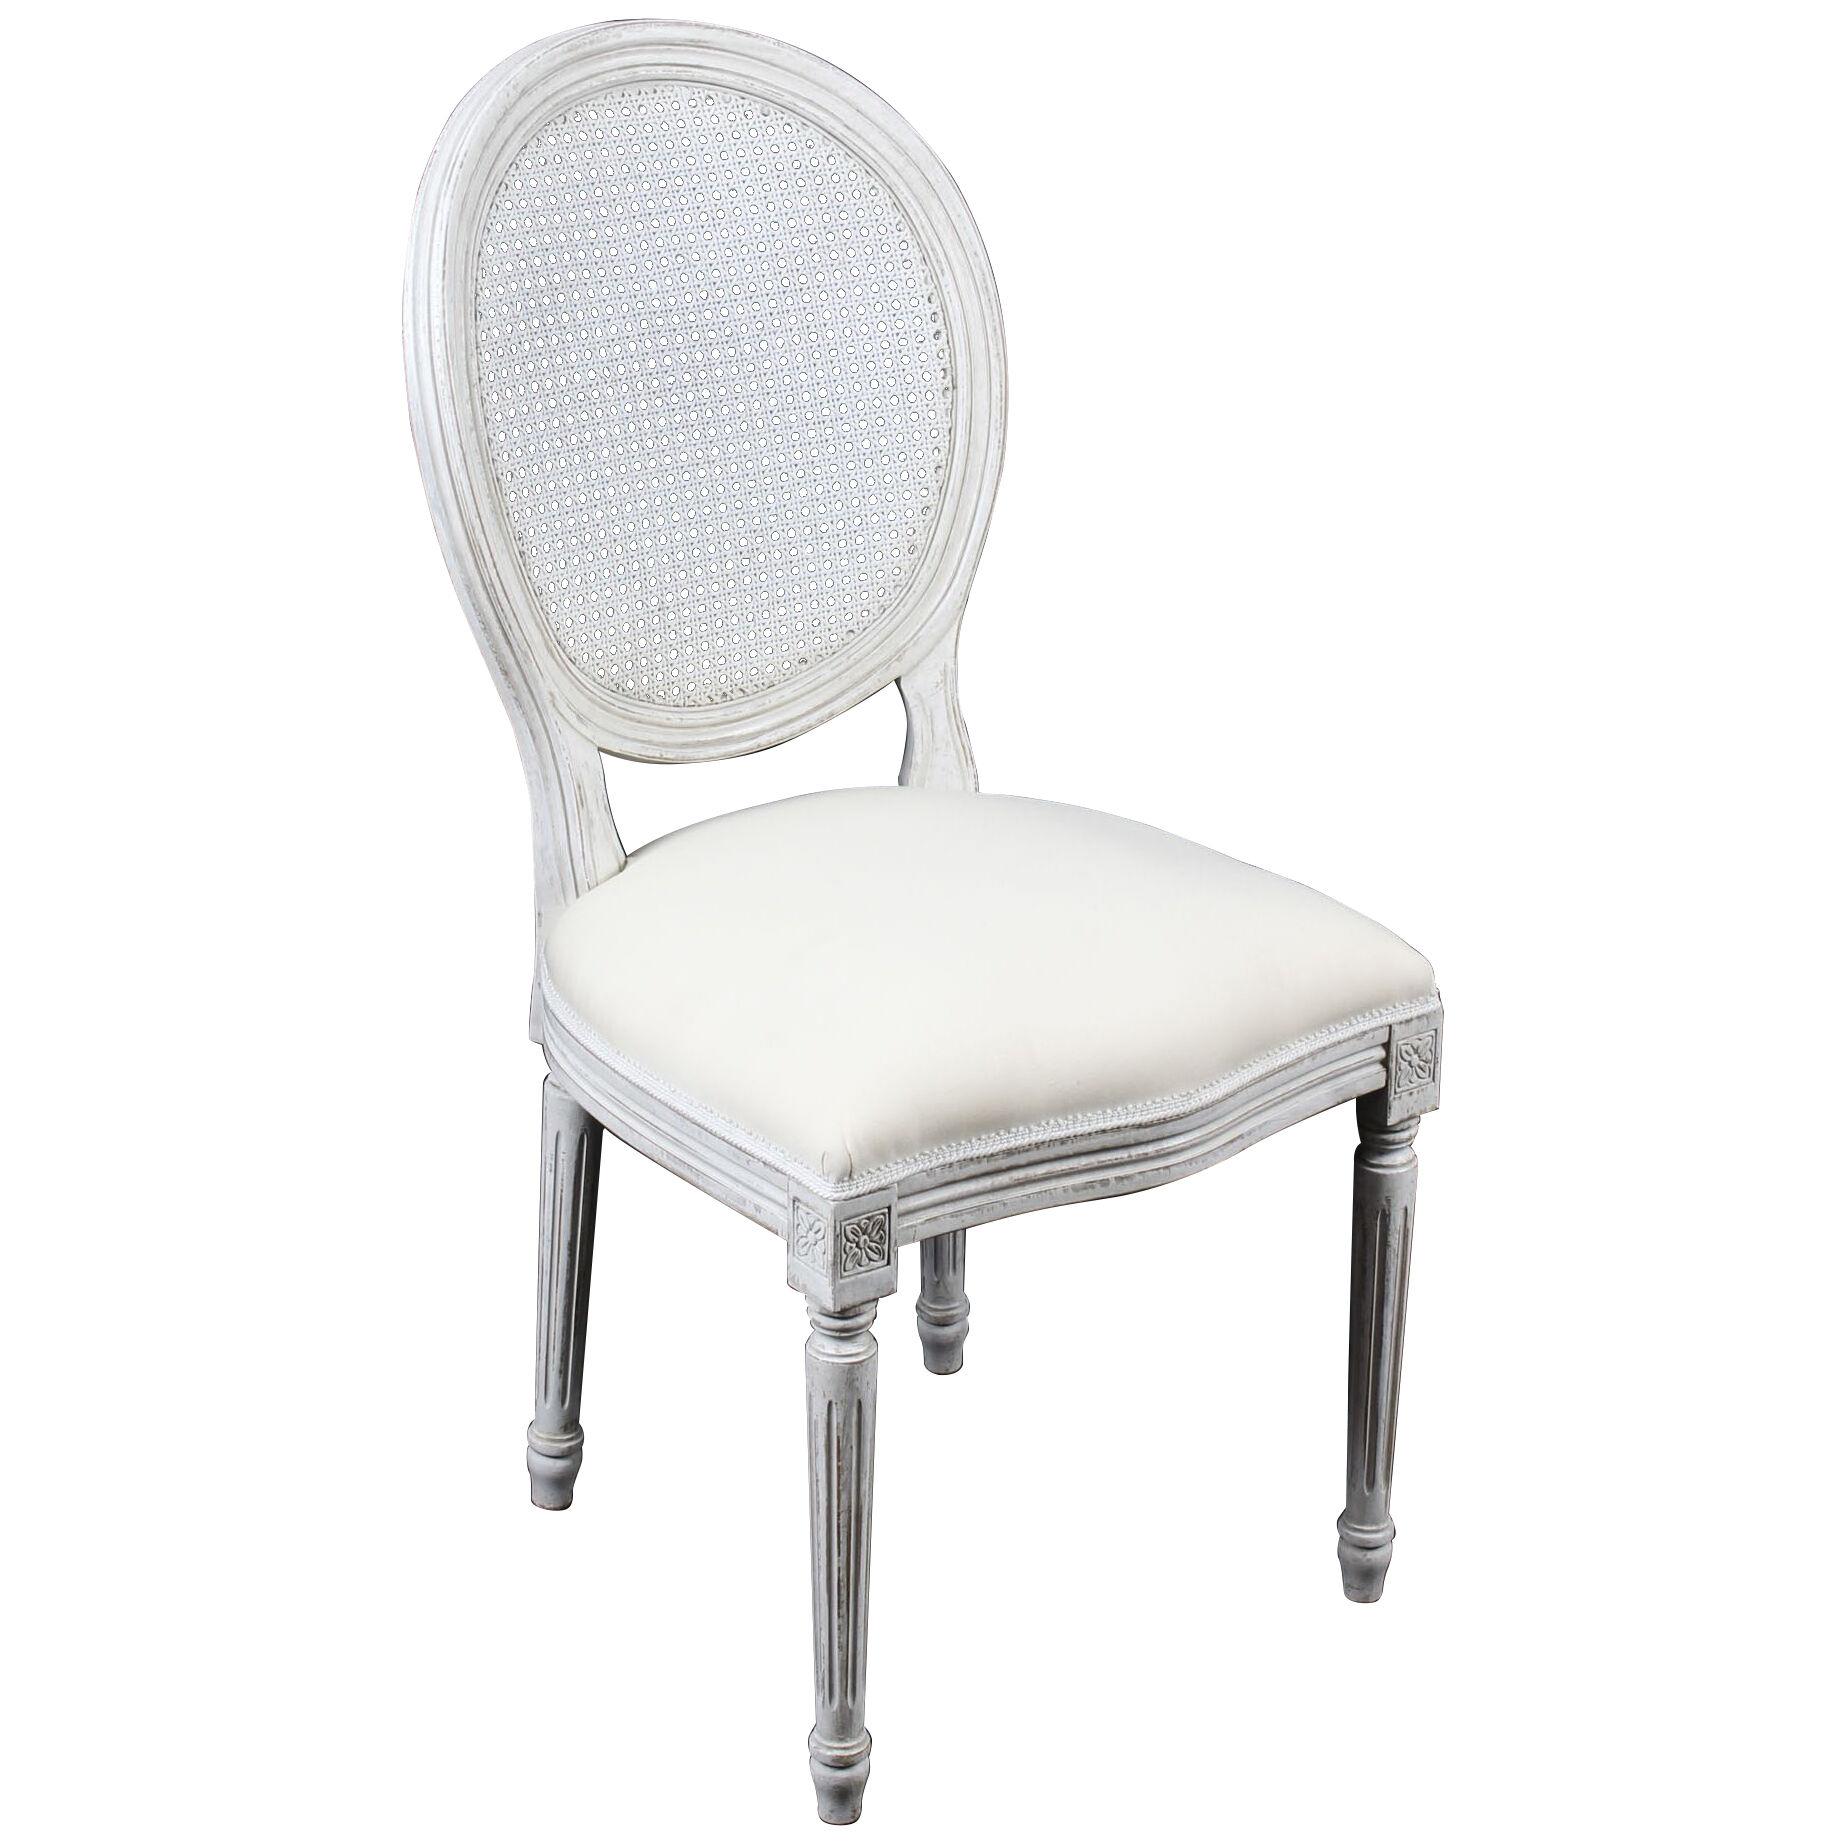 Bespoke Painted Dining Chair in the Louis XV Style Available to Order in Sets